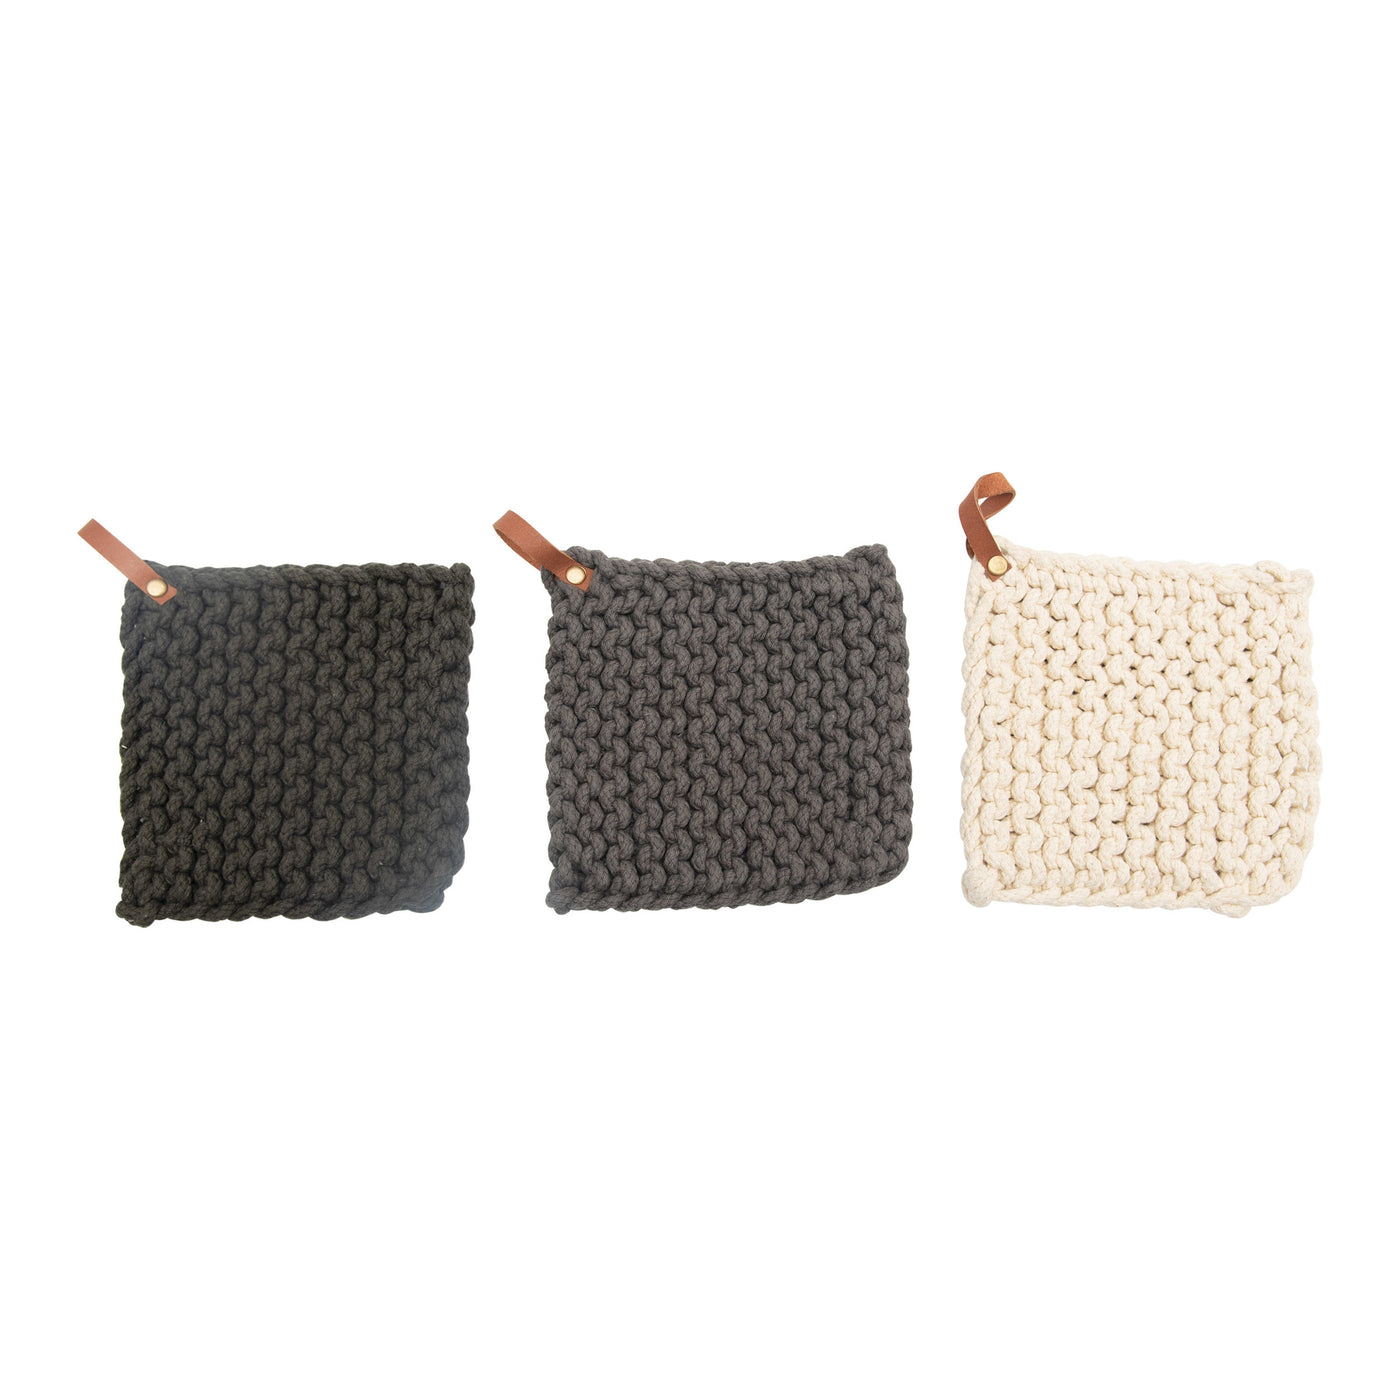 Crocheted Pot Holder w/ Leather Loop